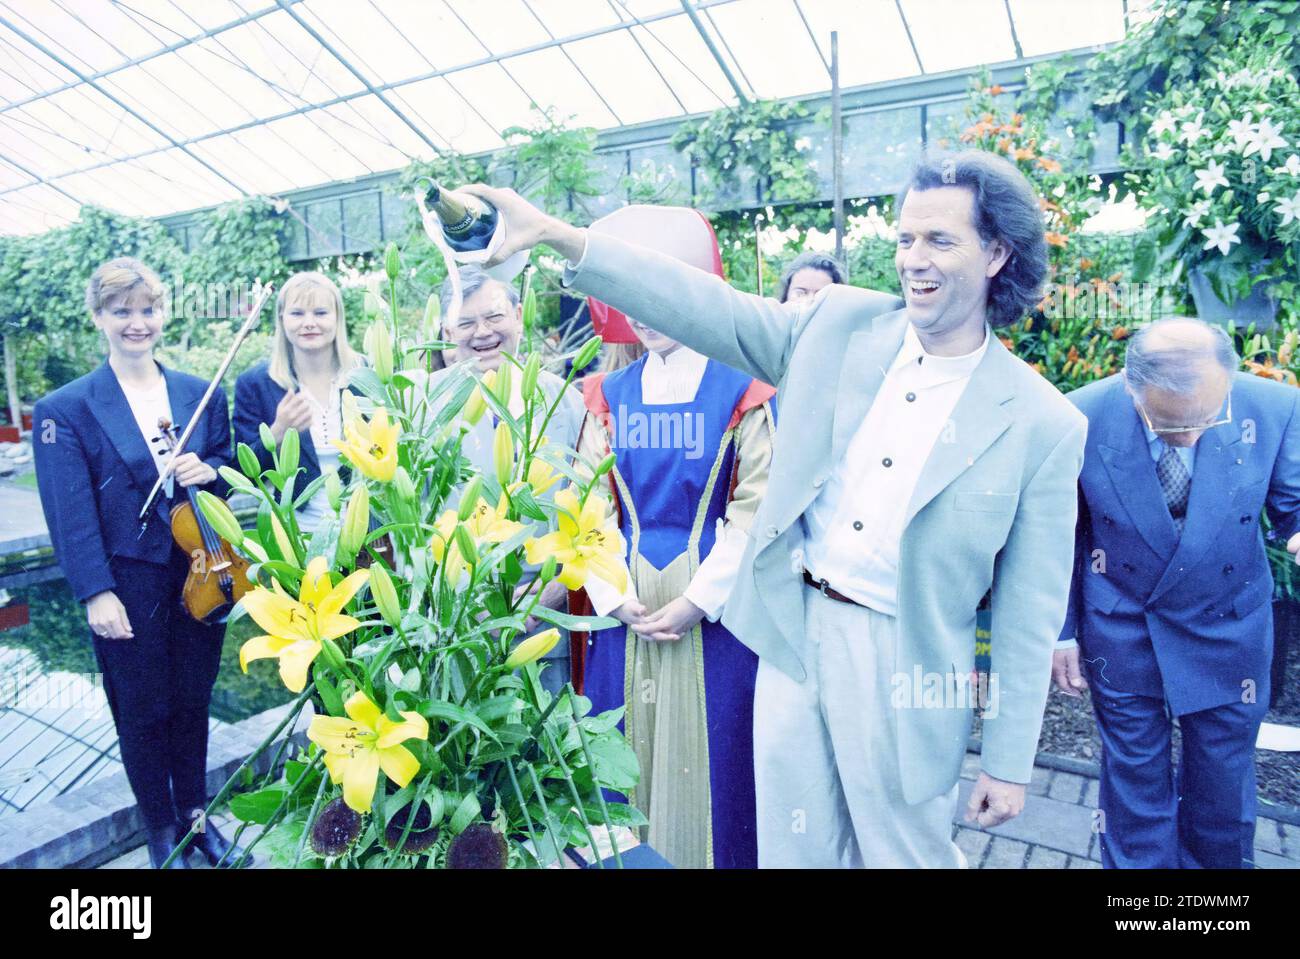 Baptism Andre Rieu Lelie, 11-05-1995, Whizgle News from the Past, Tailored for the Future. Explore historical narratives, Dutch The Netherlands agency image with a modern perspective, bridging the gap between yesterday's events and tomorrow's insights. A timeless journey shaping the stories that shape our future Stock Photo